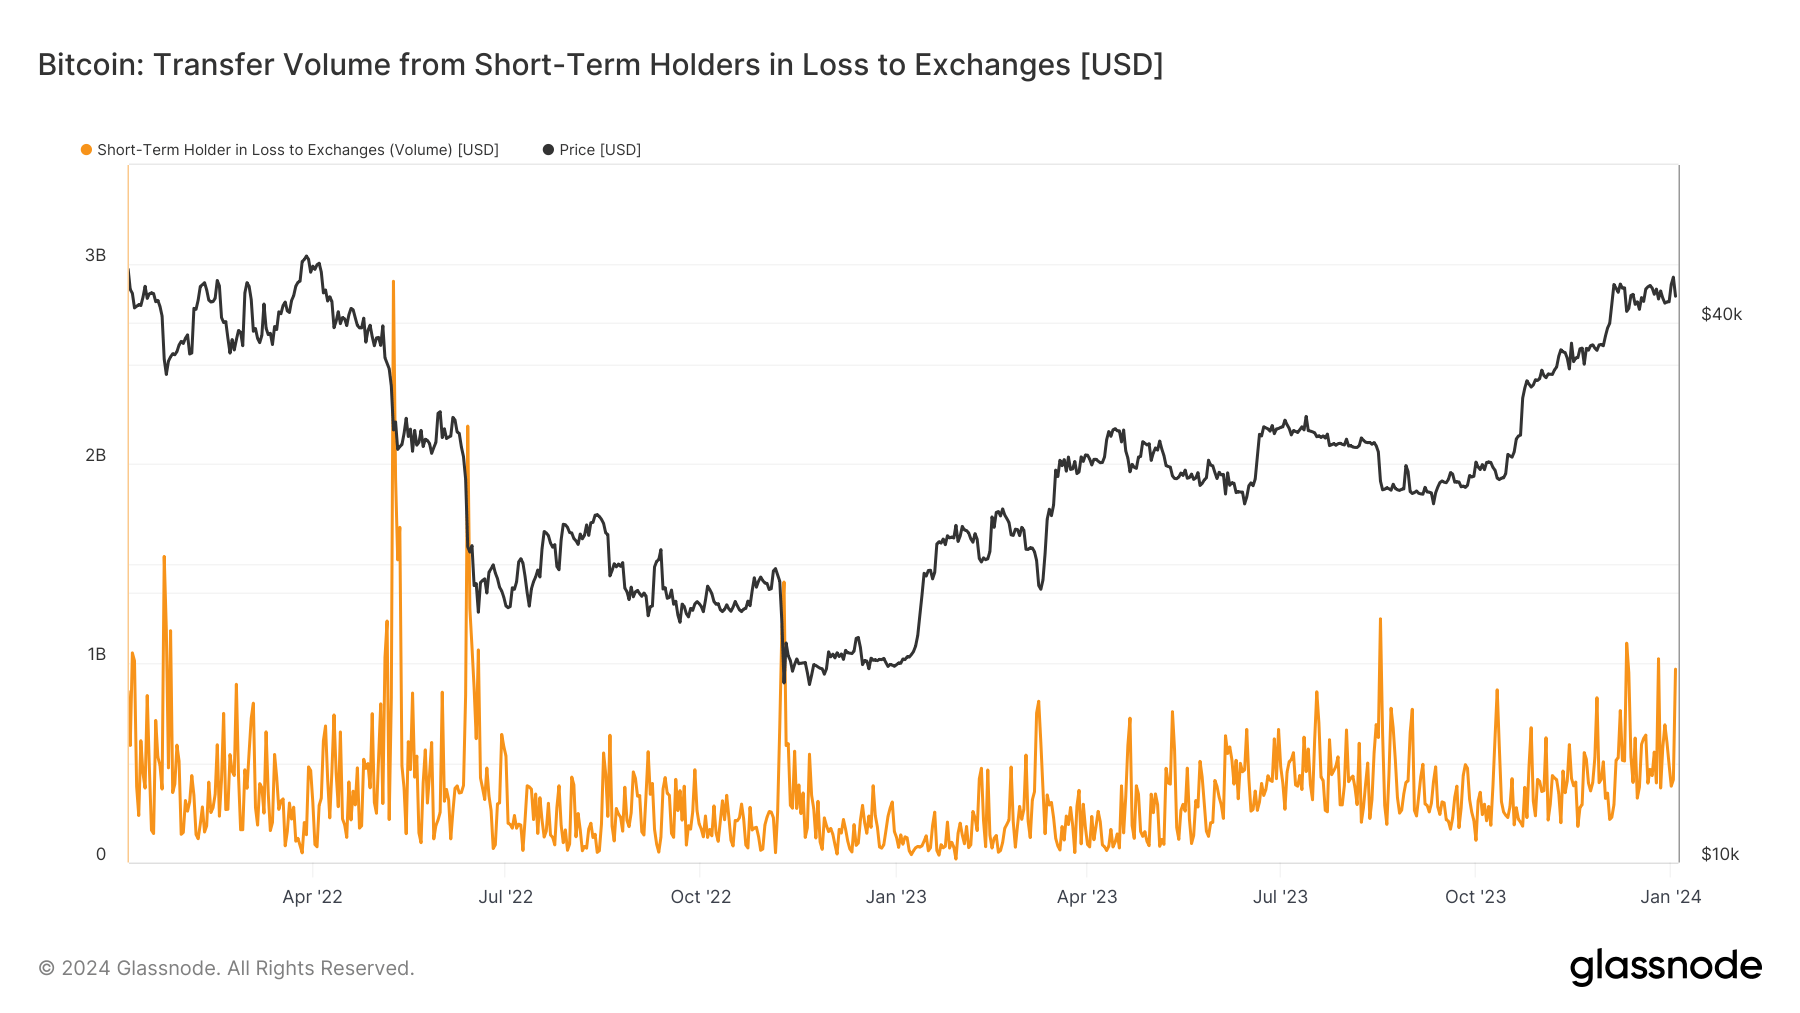 Transfer Volume from Short-term holders in loss to exchanges: (Source: Glassnode)